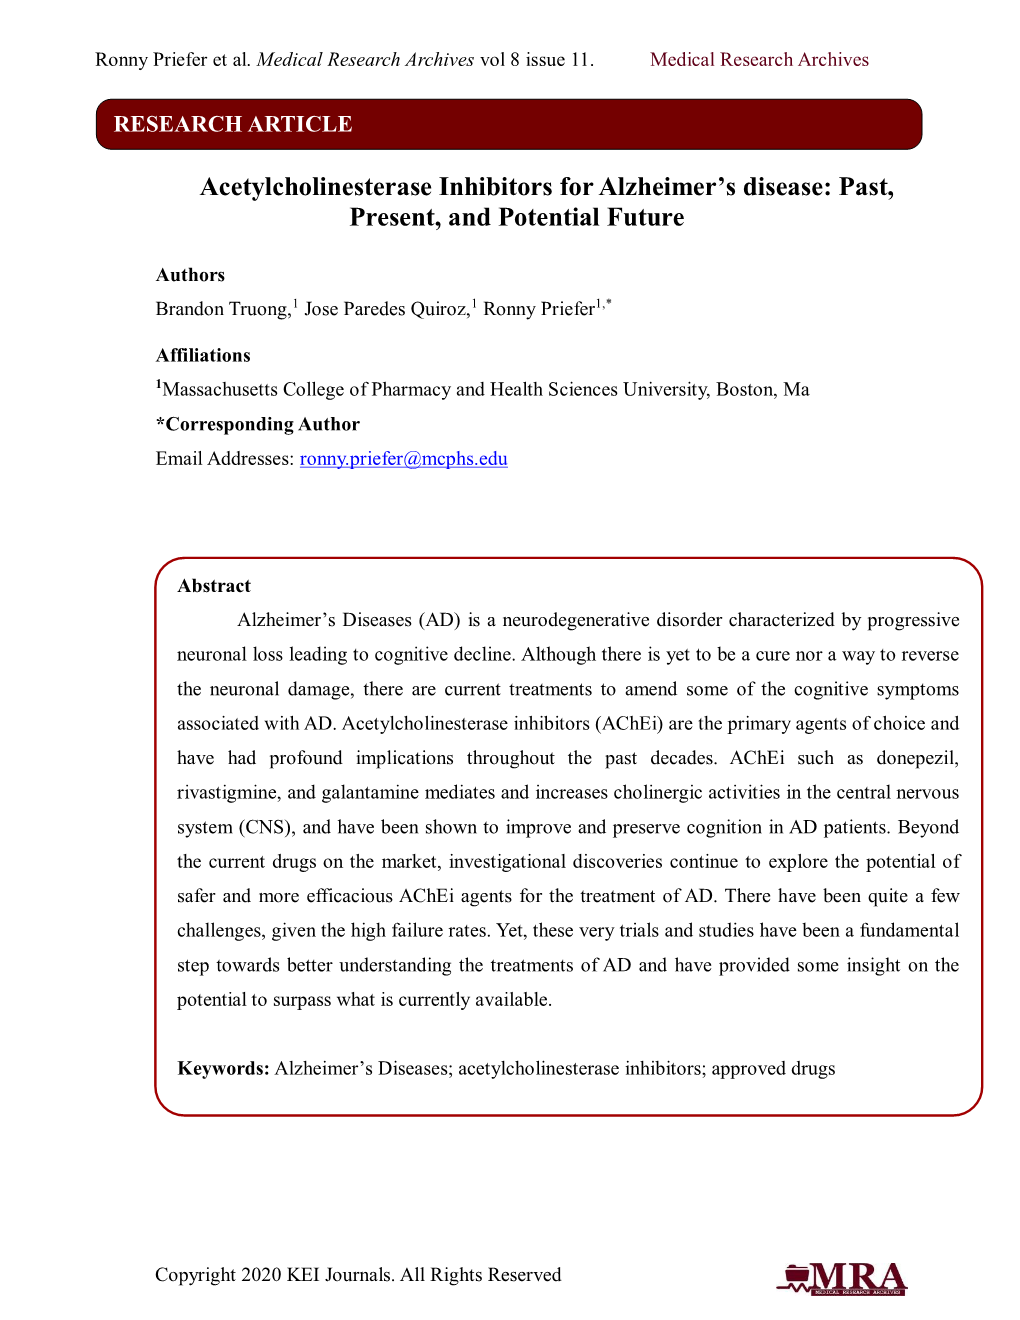 Acetylcholinesterase Inhibitors for Alzheimer’S Disease: Past, Present, and Potential Future